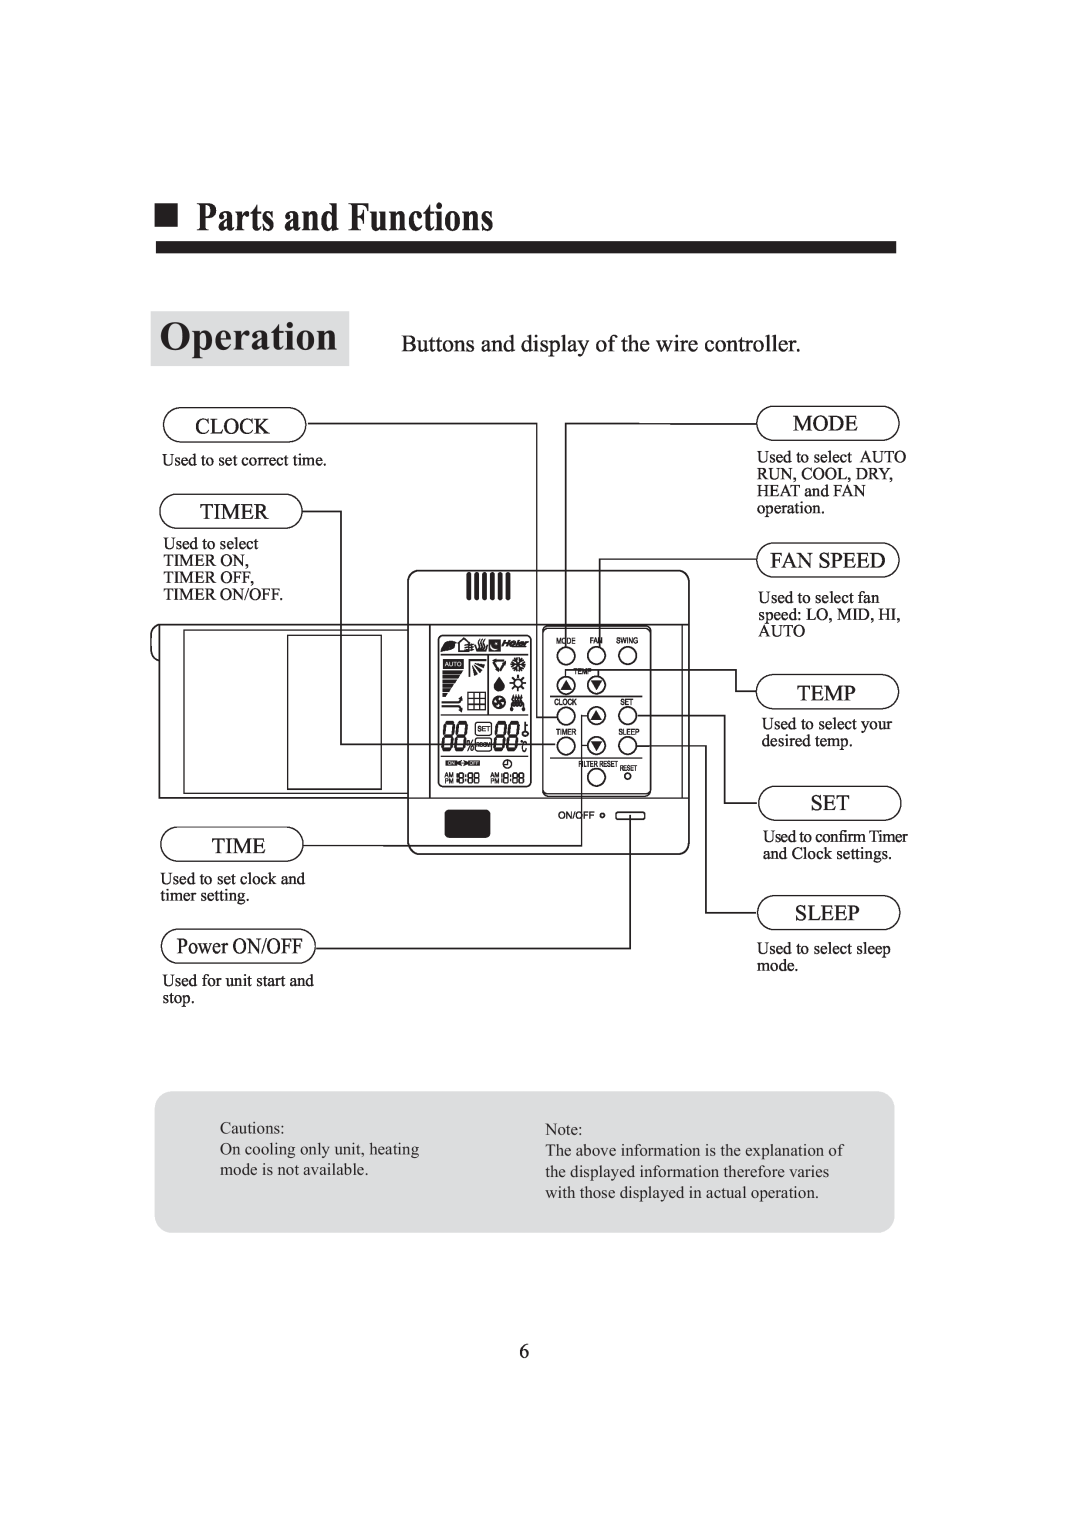 Haier AB242XCAAA operation manual Parts and Functions, Operation, Buttons and display of the wire controller 